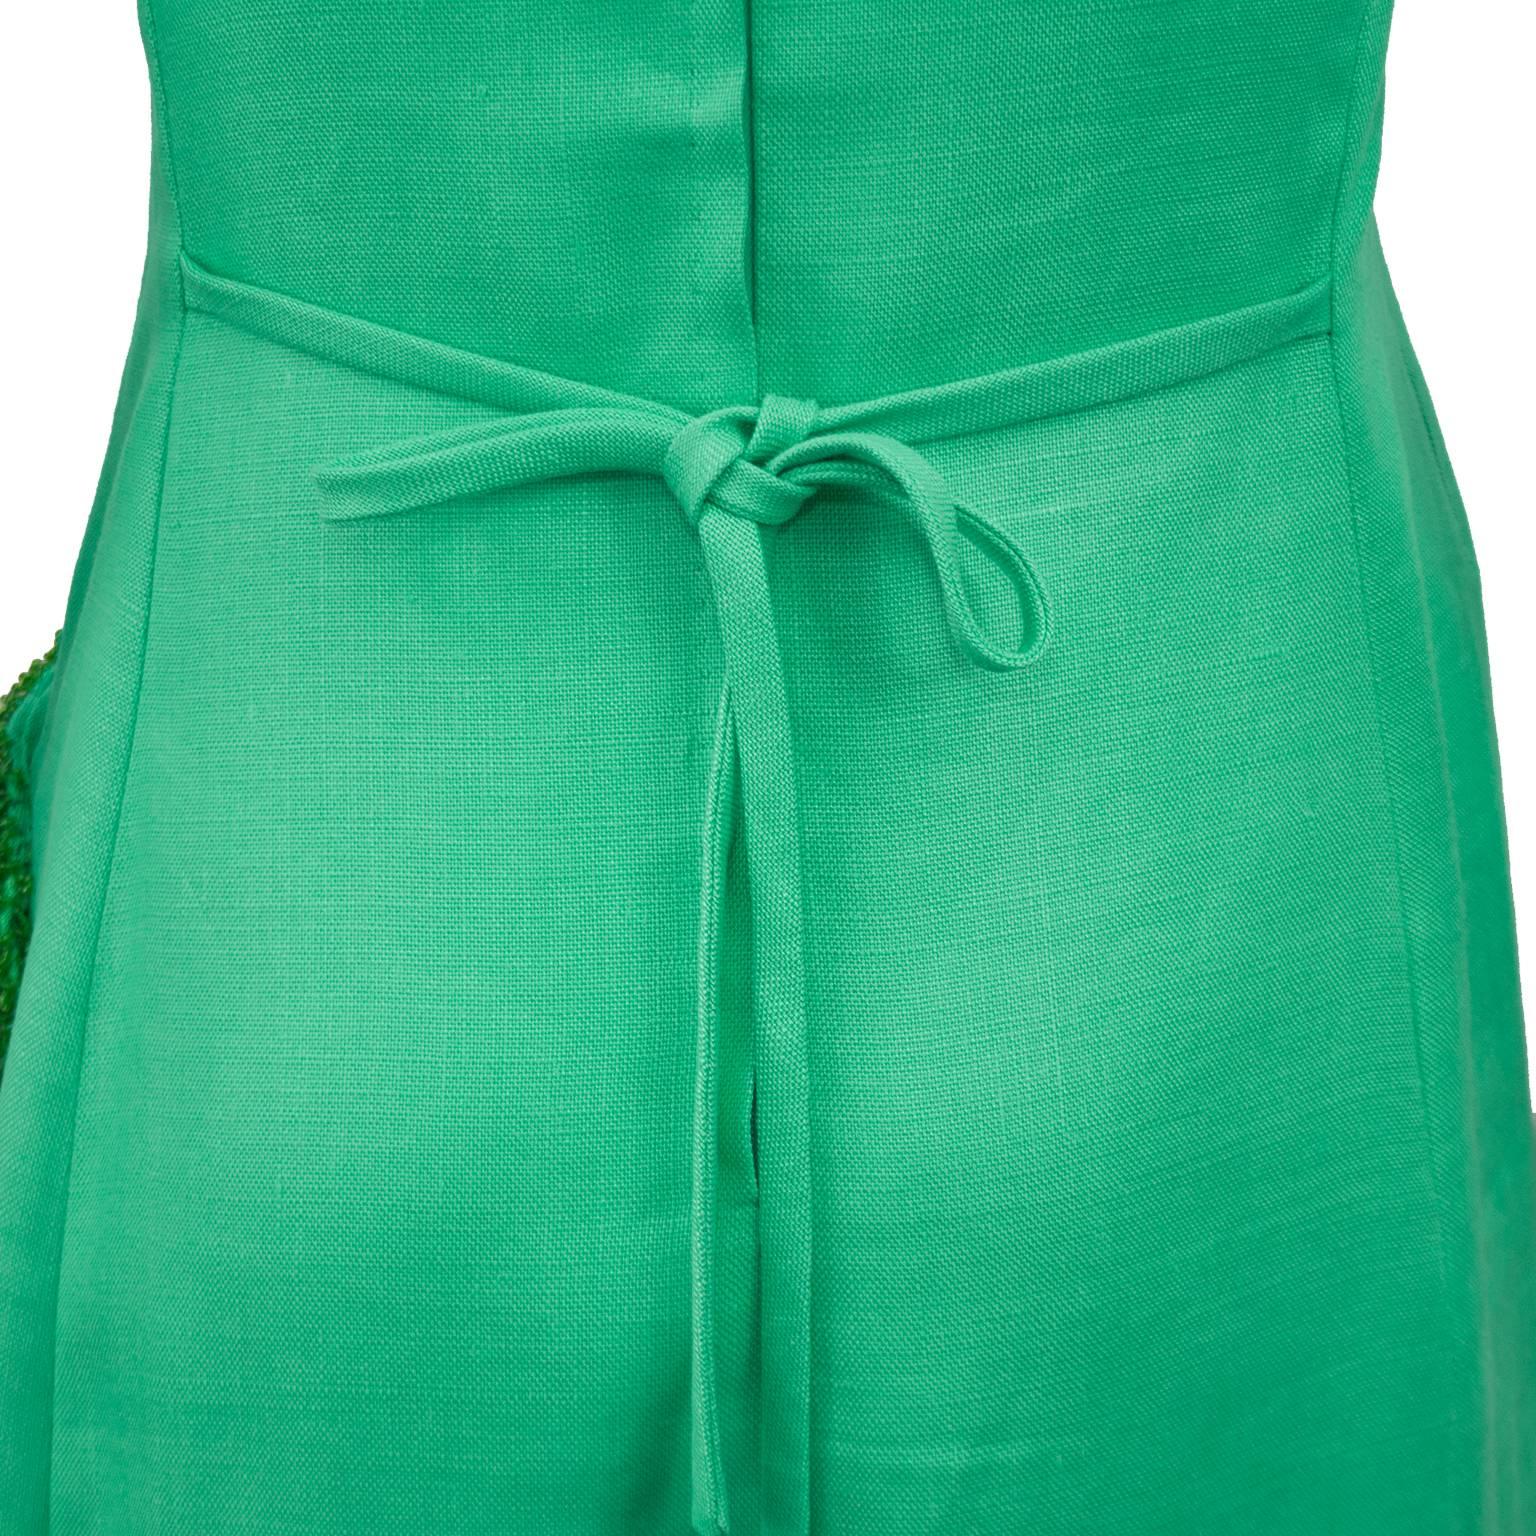 Maggy Reeves Couture Green Dress with Embellished Pocket and Handbag, 1960s  For Sale 1